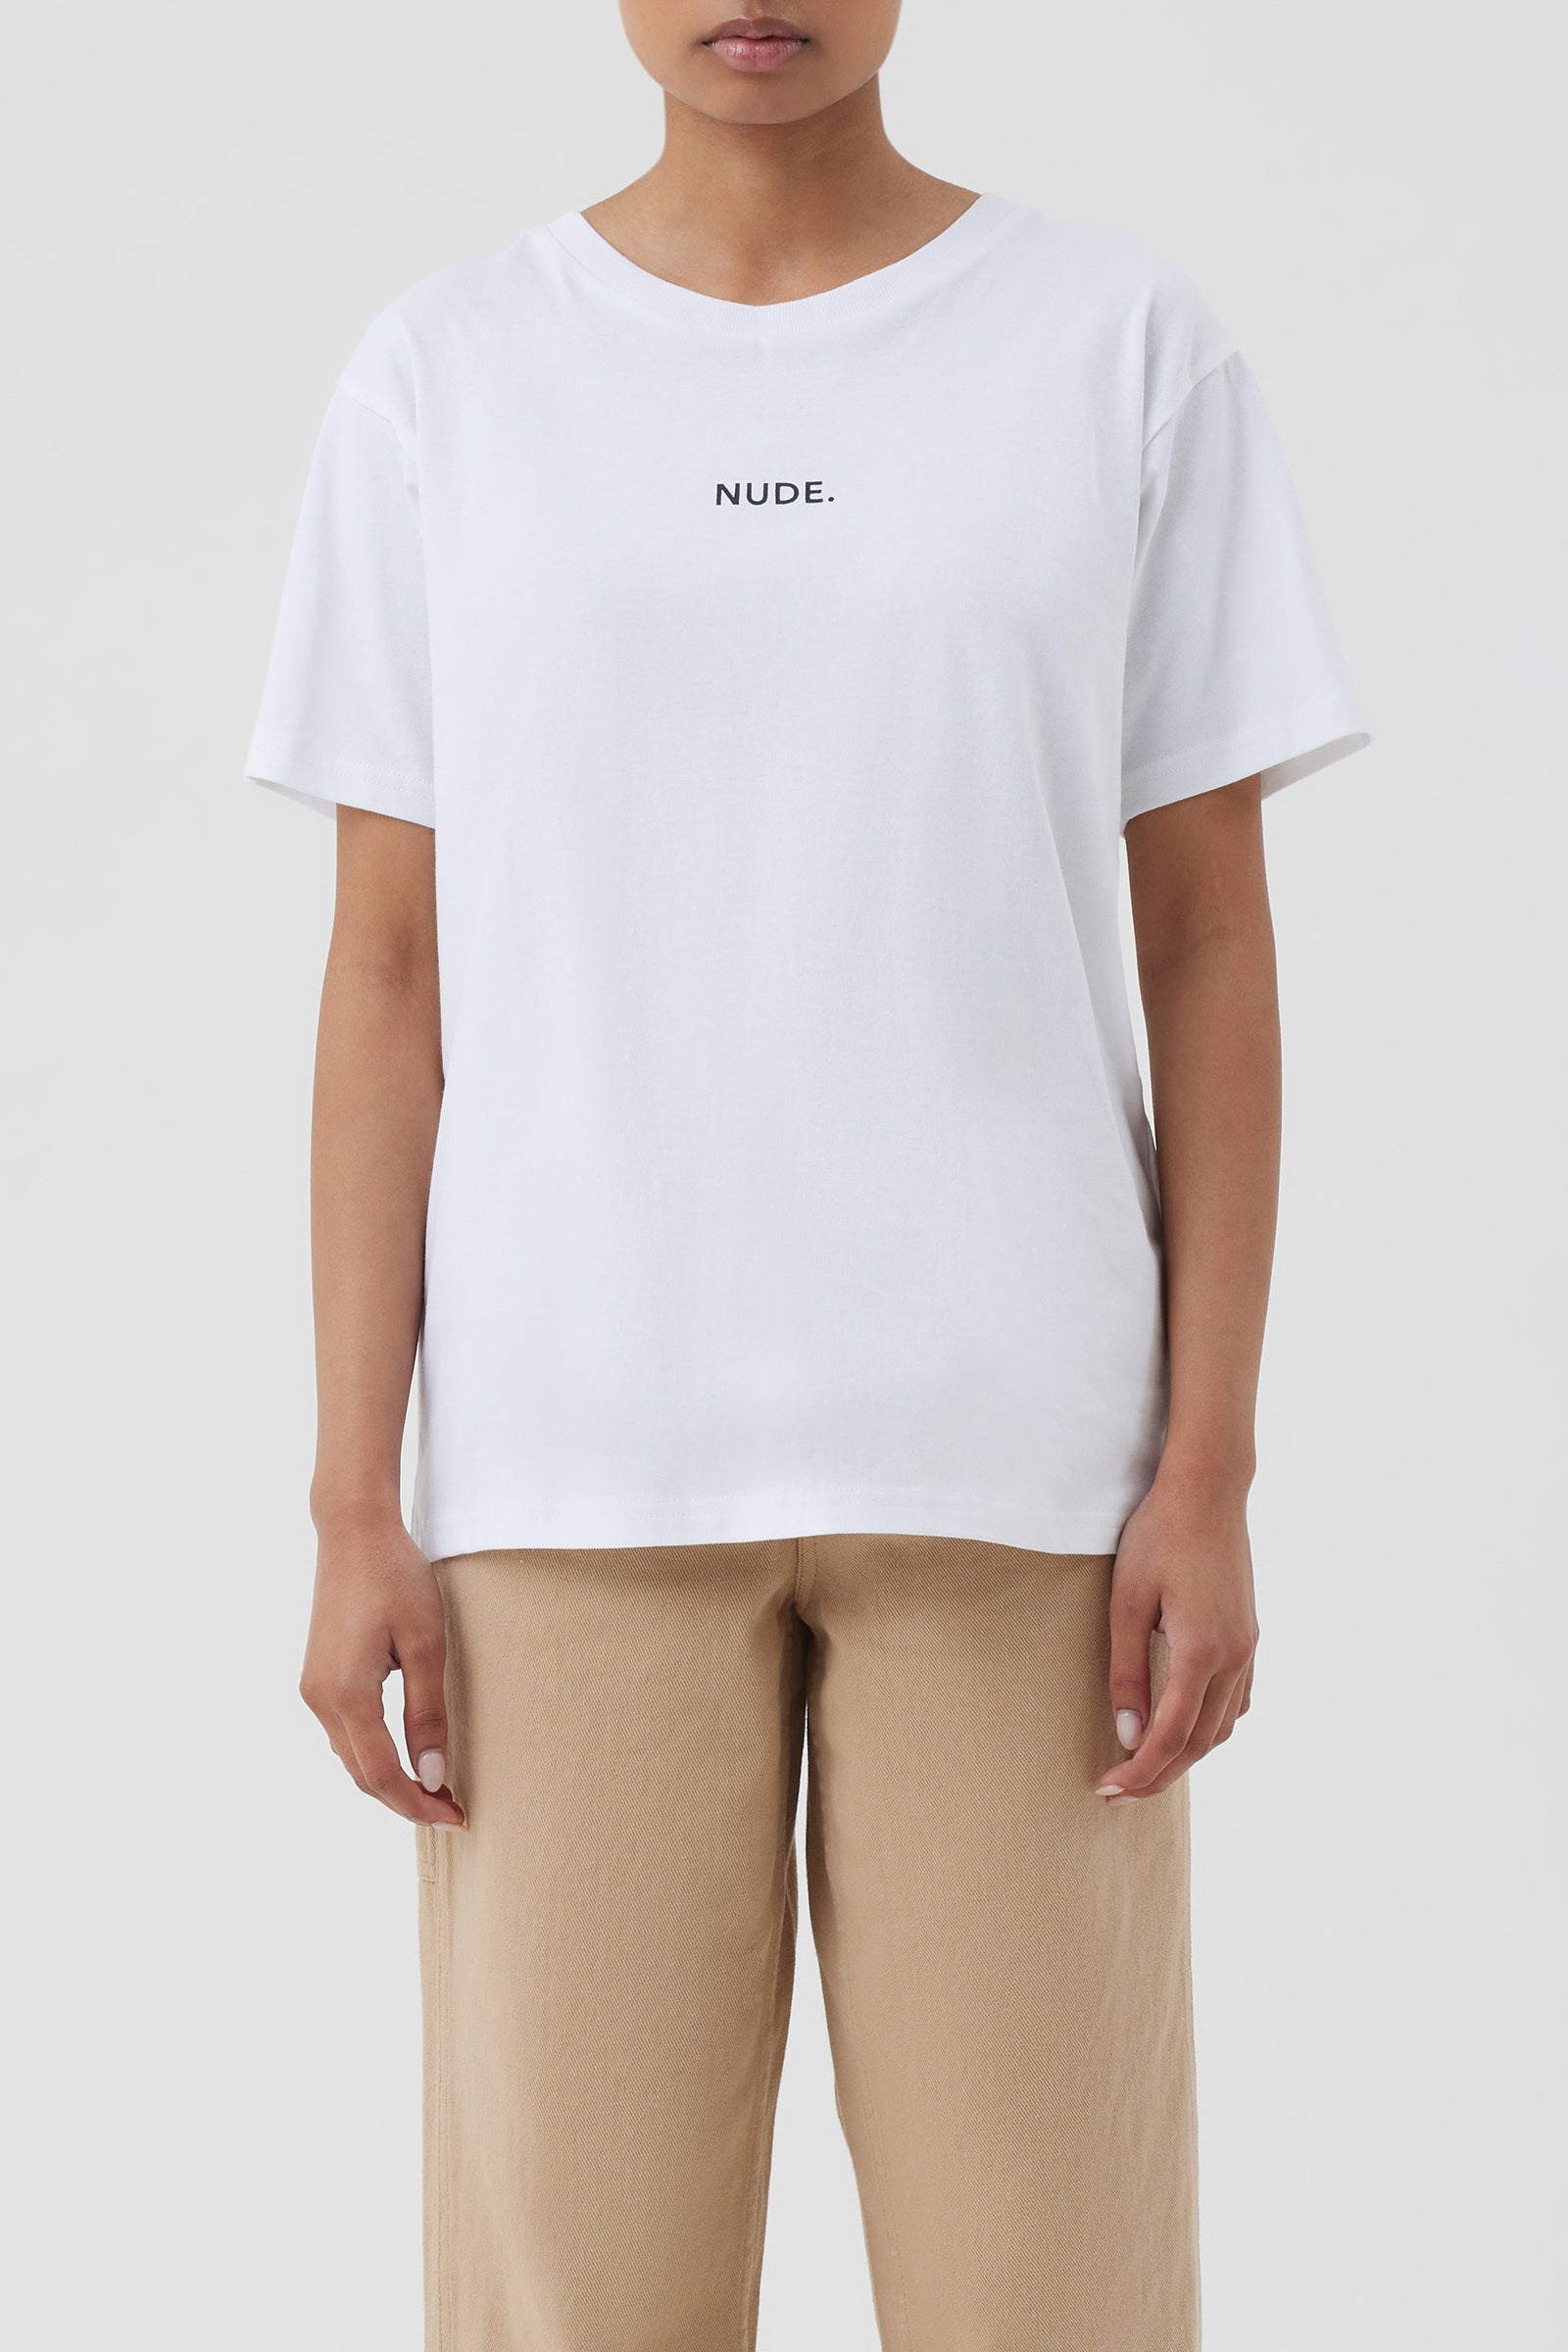 Nude Lucy Nude Tee In White 